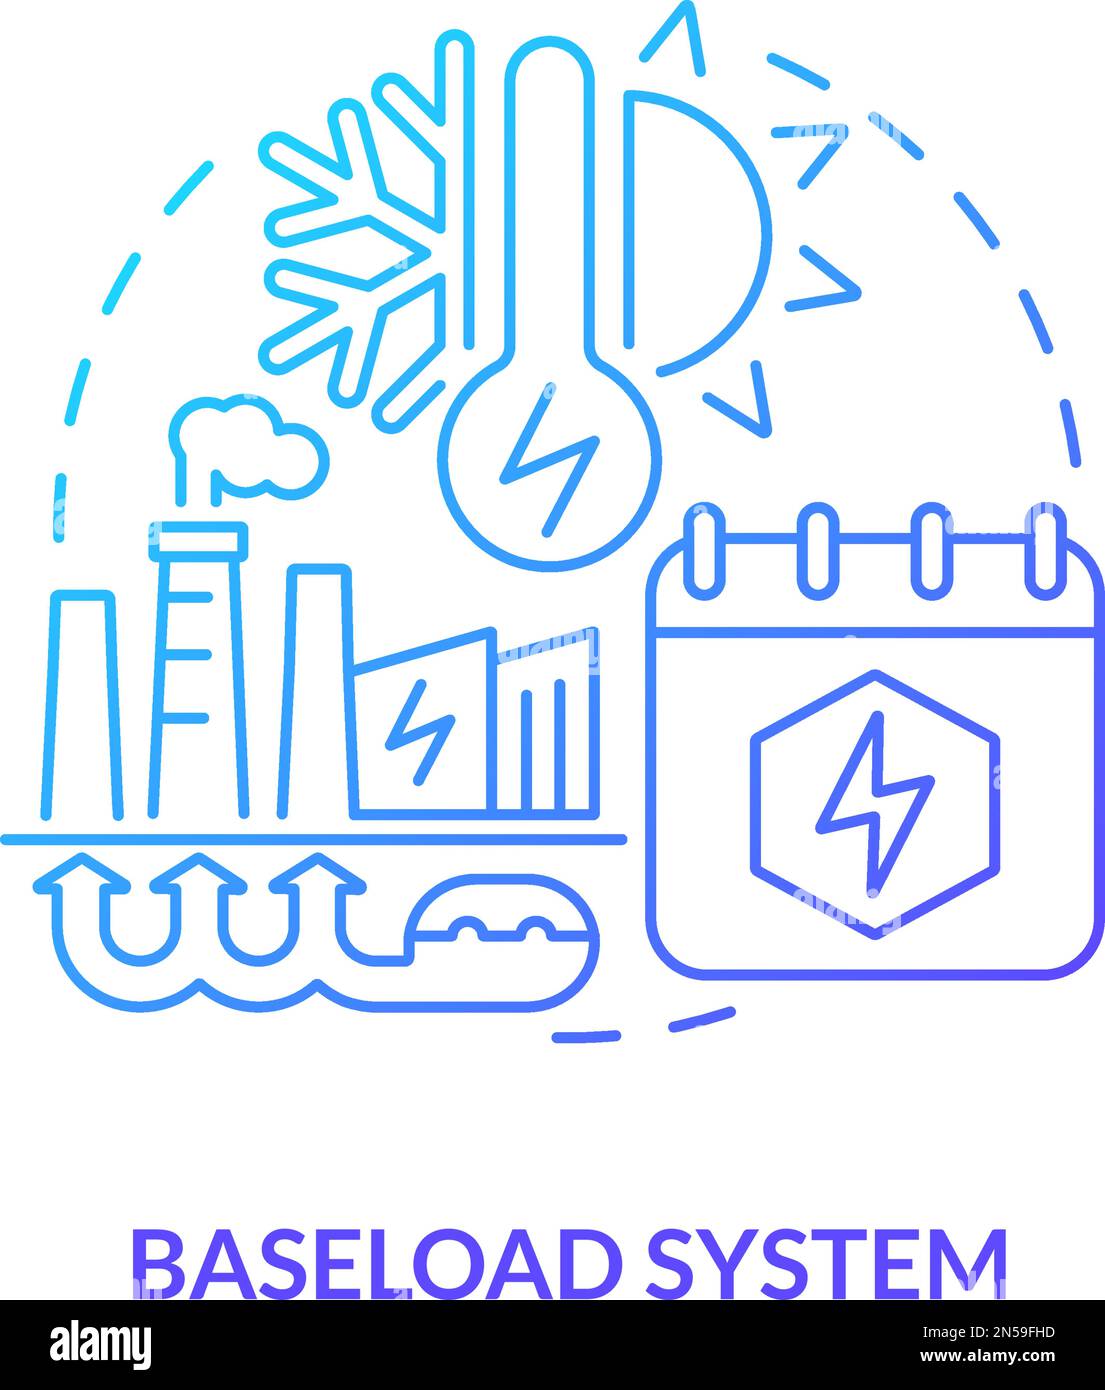 Baseload system blue gradient concept icon Stock Vector